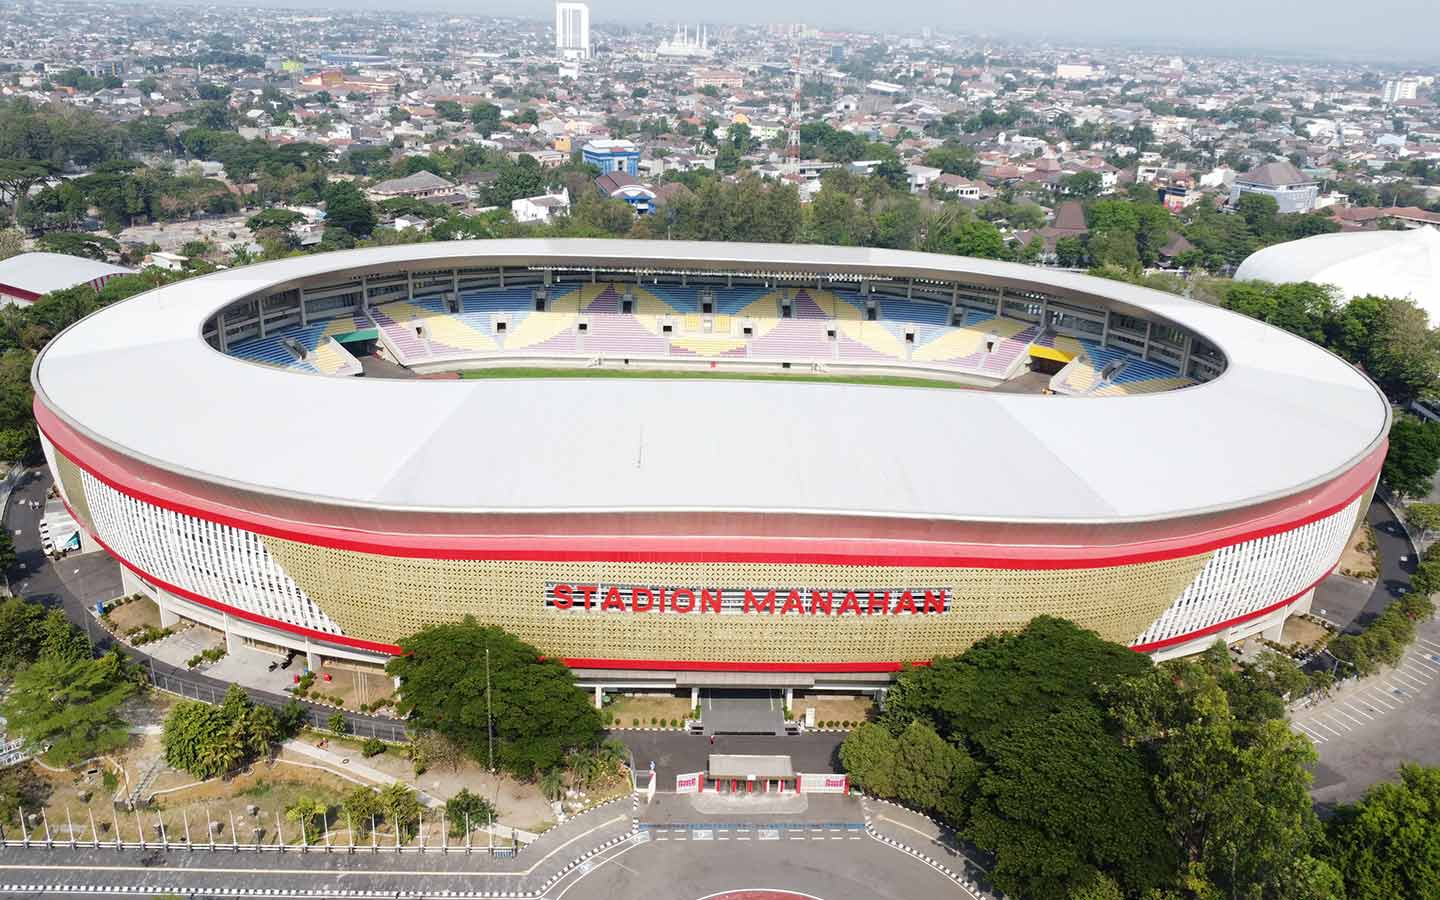 Manahan Stadium with its modern architectural excellence, is ready to hold the FIFA U17 World Cup matches